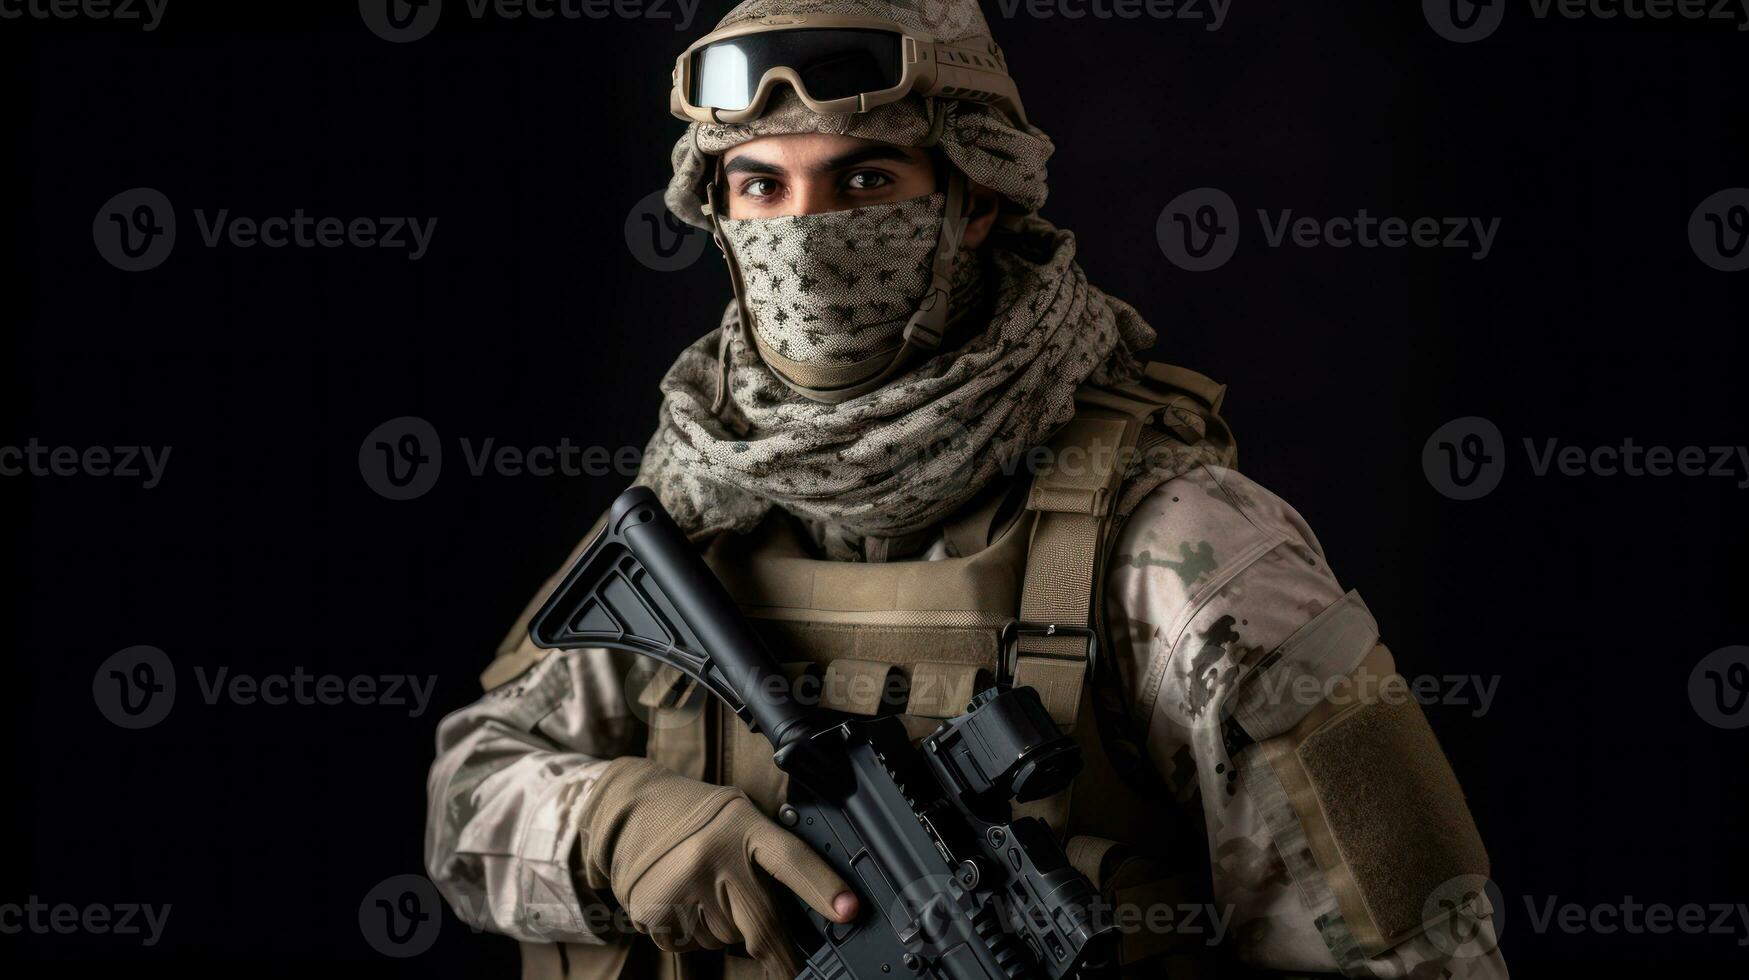 Army soldier in Combat Uniforms with assault rifle, plate carrier and combat helmet, with a Shemagh Kufiya scarf on his neck against a dark background photo